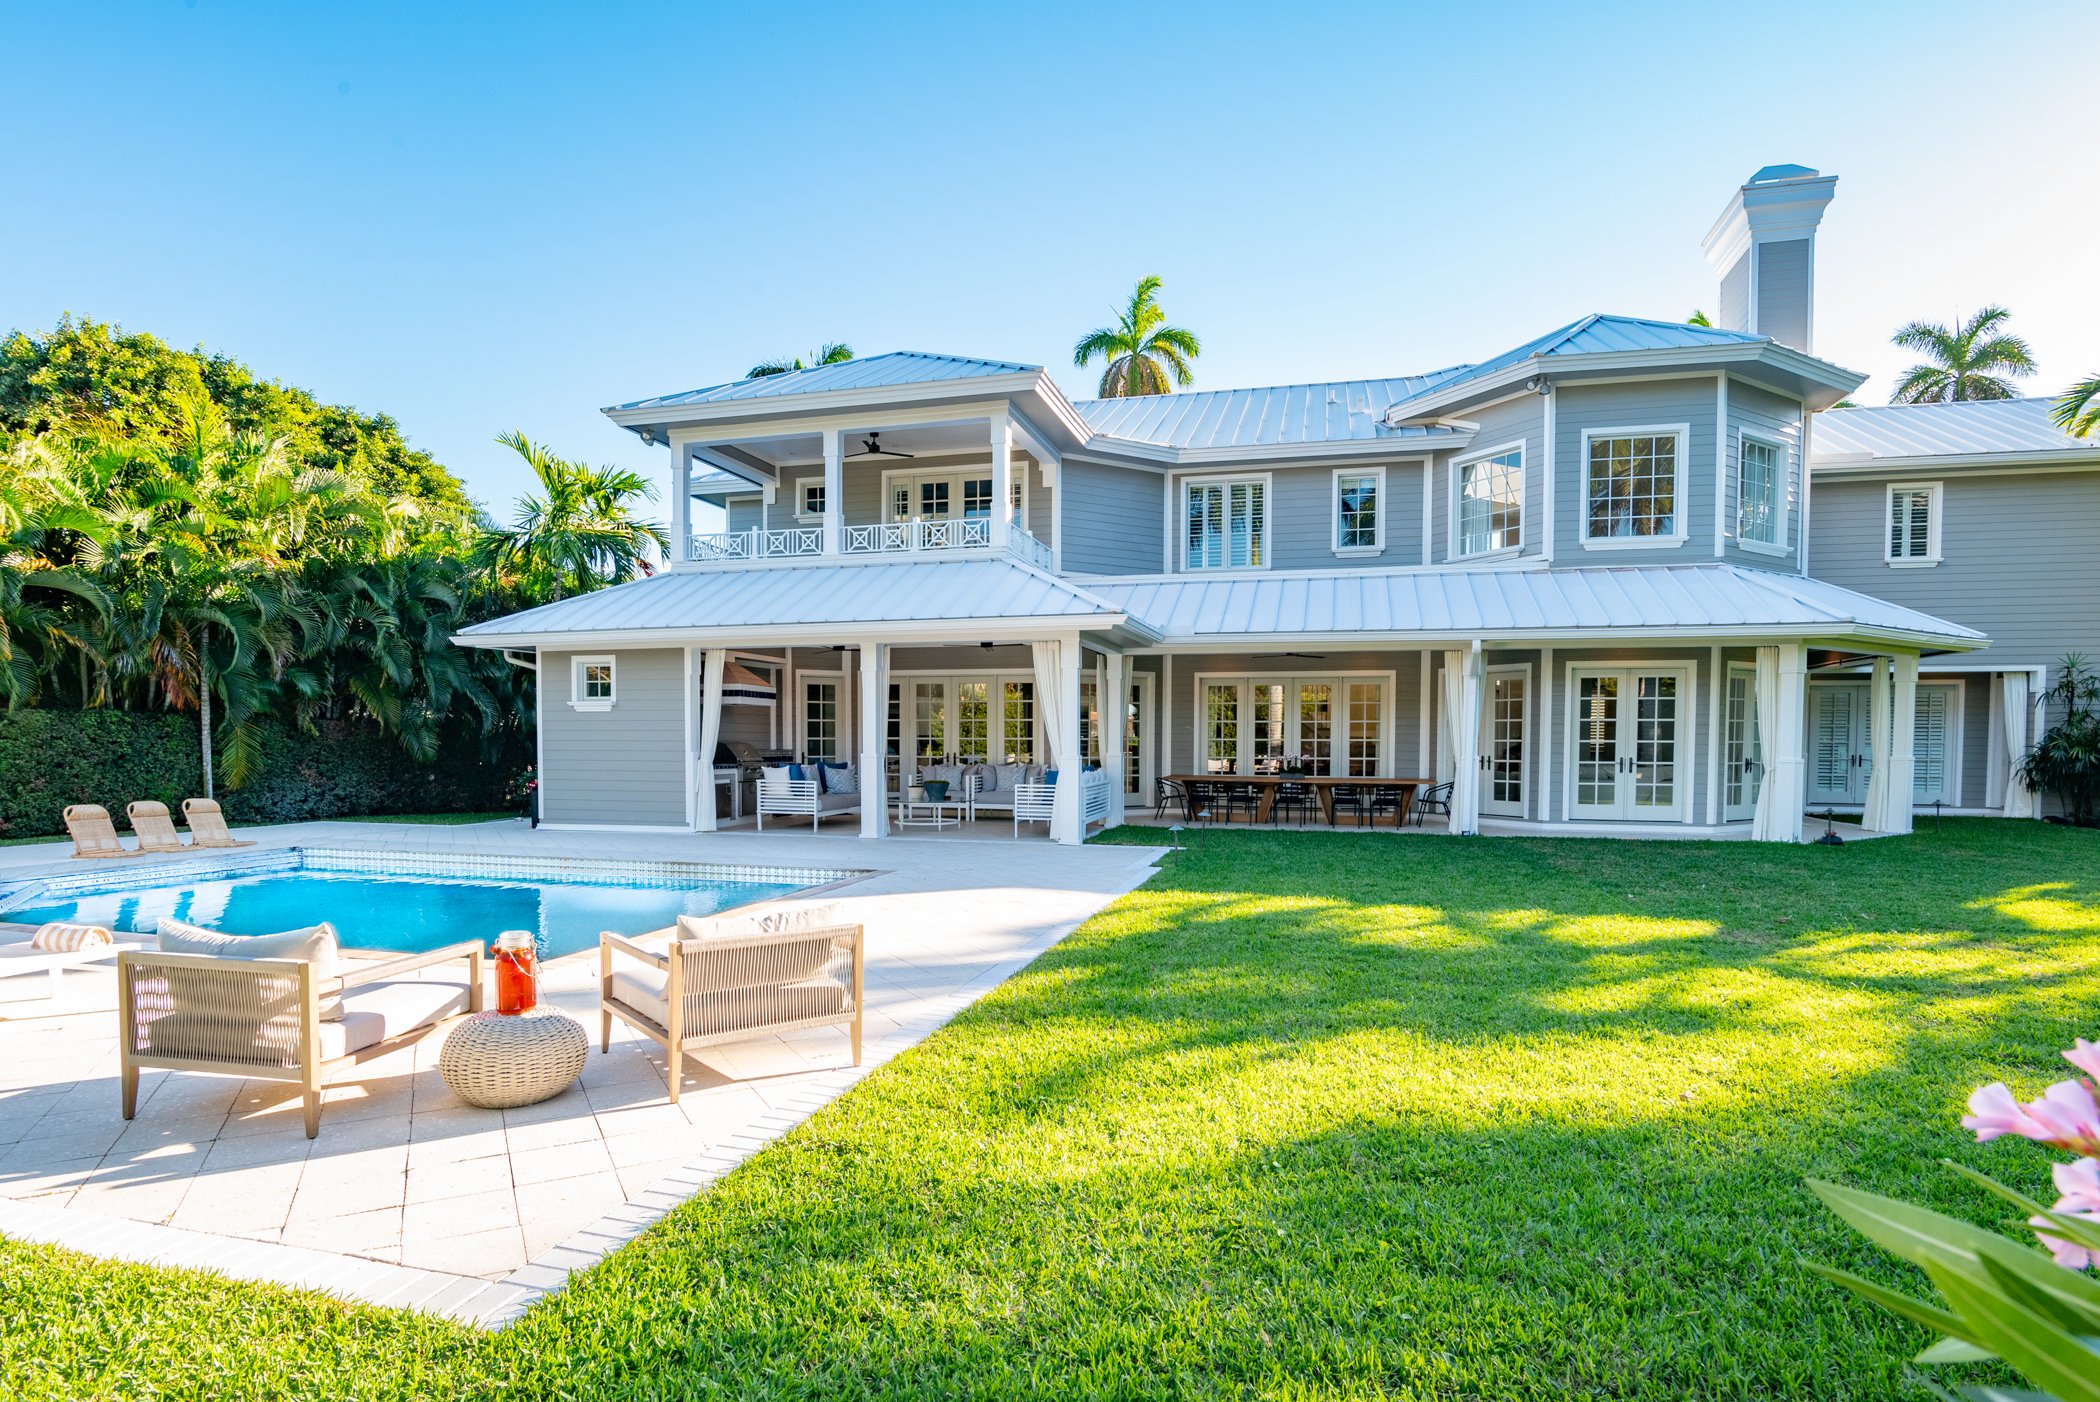 Check Out This Newly Renovated Coastal Contemporary In The Exclusive Point Manalapan Which Just Listed For $7.995 Million 17.jpg